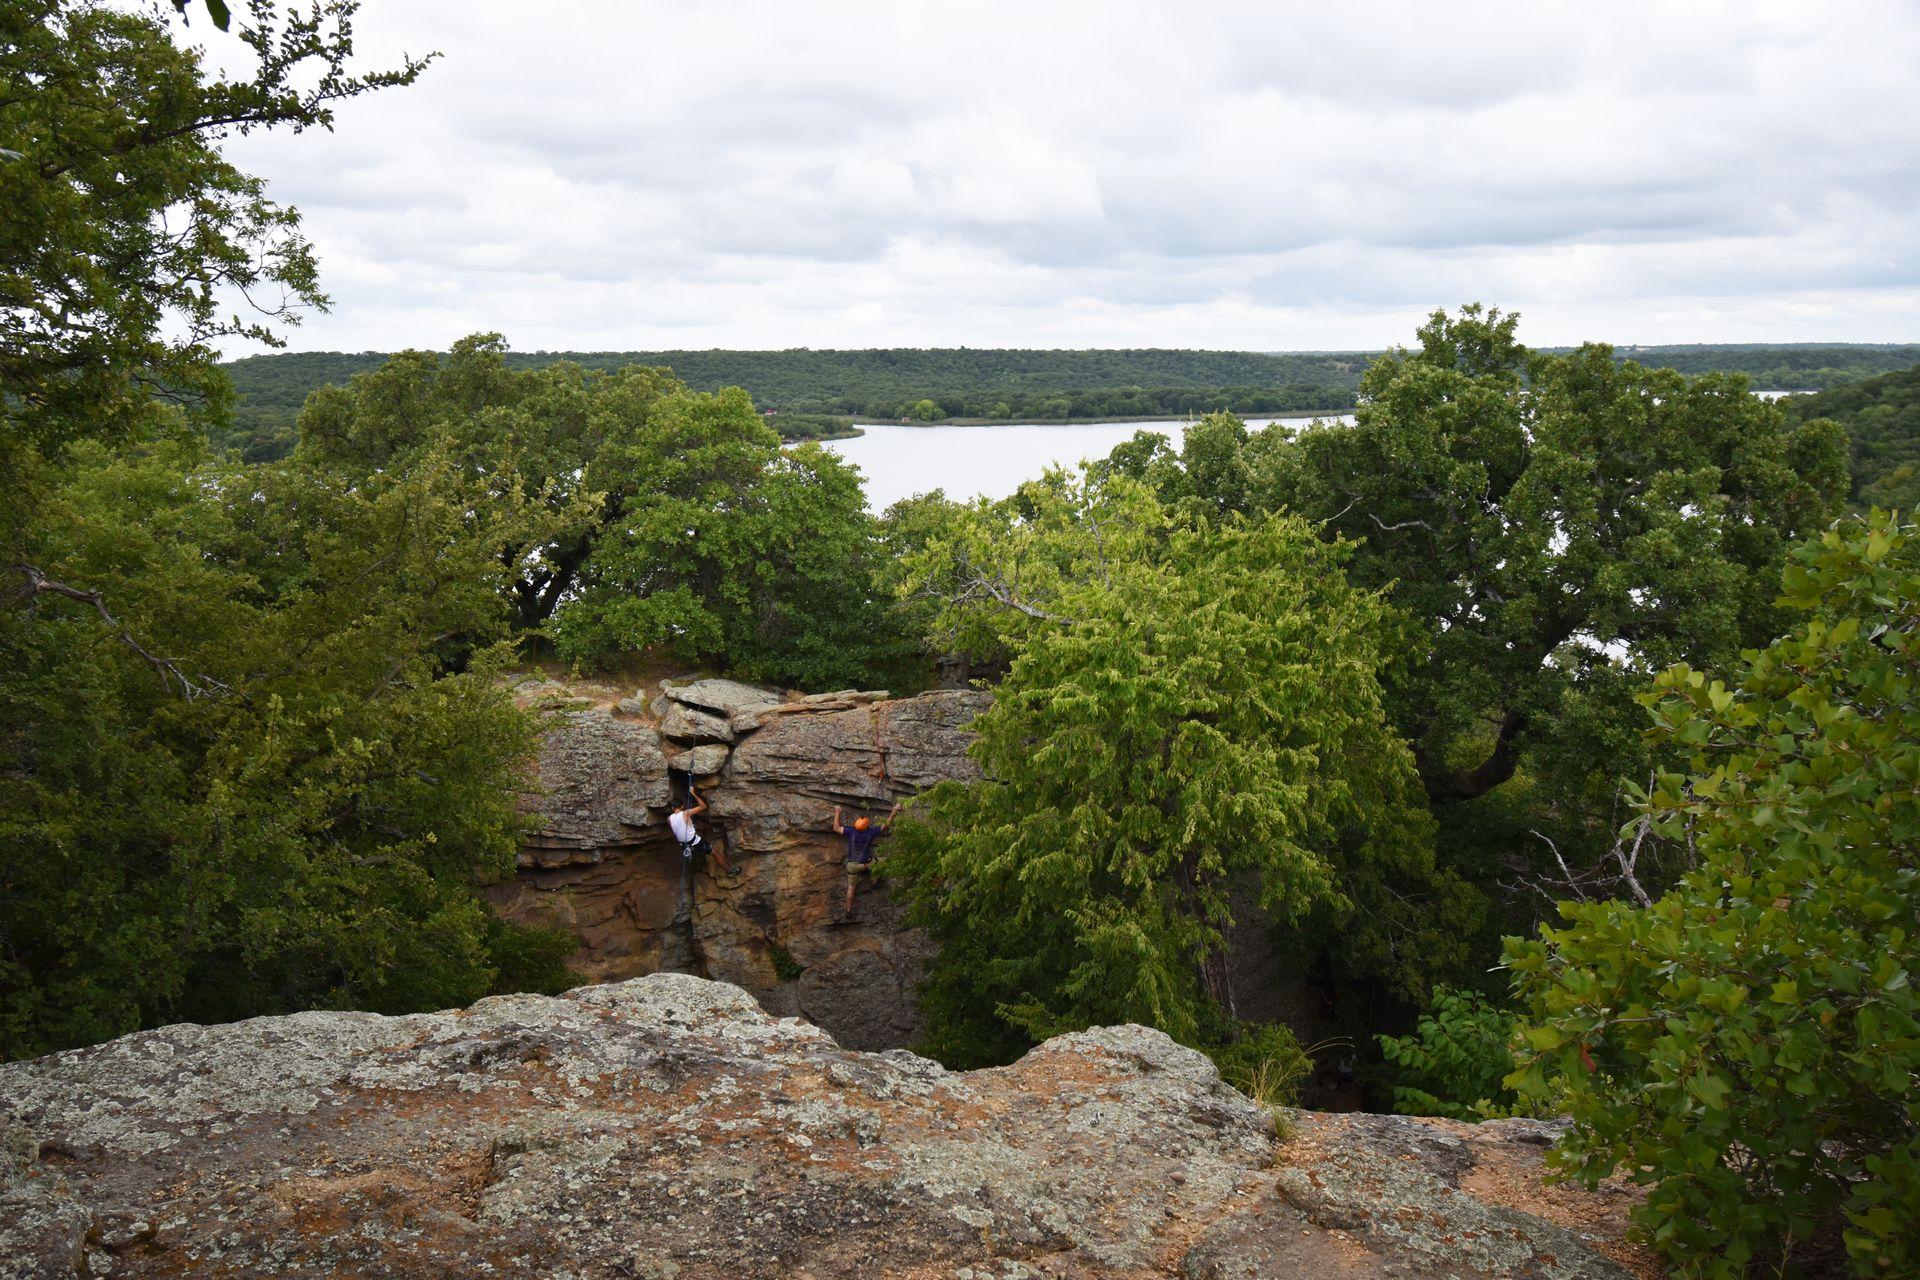 Rock climbers on their way up a rock in Minerall Wells State Park.